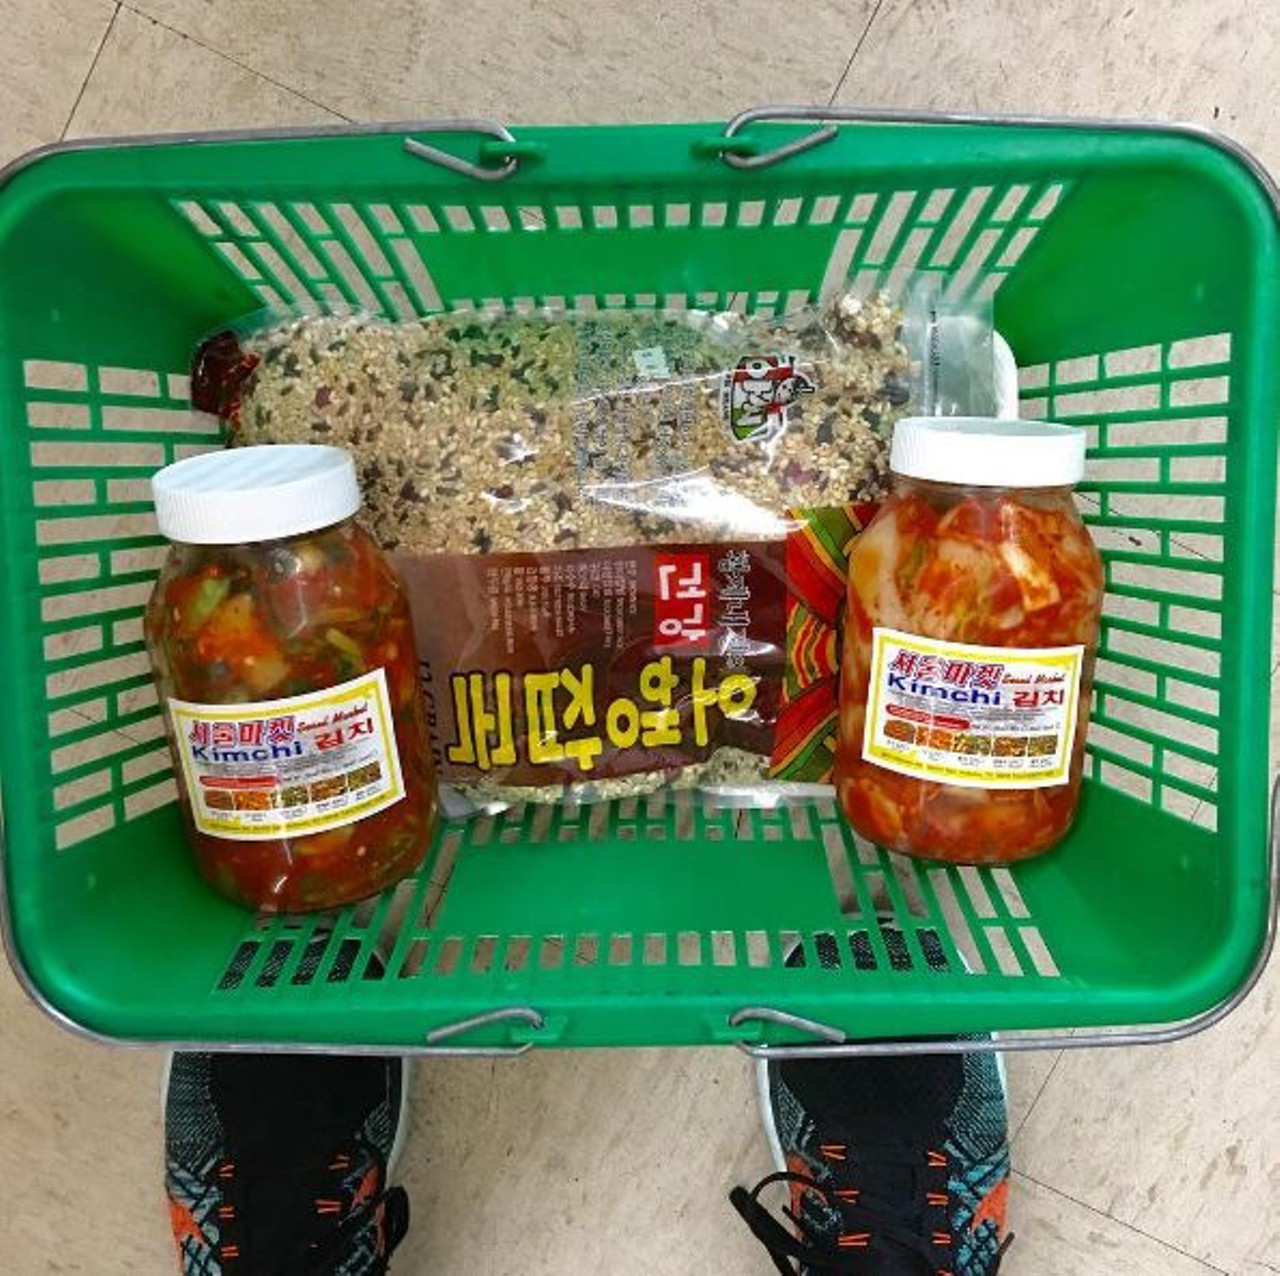 Seoul Asian Market & Cafe
1027 Rittiman Road #101, (210) 822-1529, facebook.com
This market provides enough kimchi for days, both freshly made in-store and packaged for you to enjoy at home.
Photo via Instagram, diaryofscott